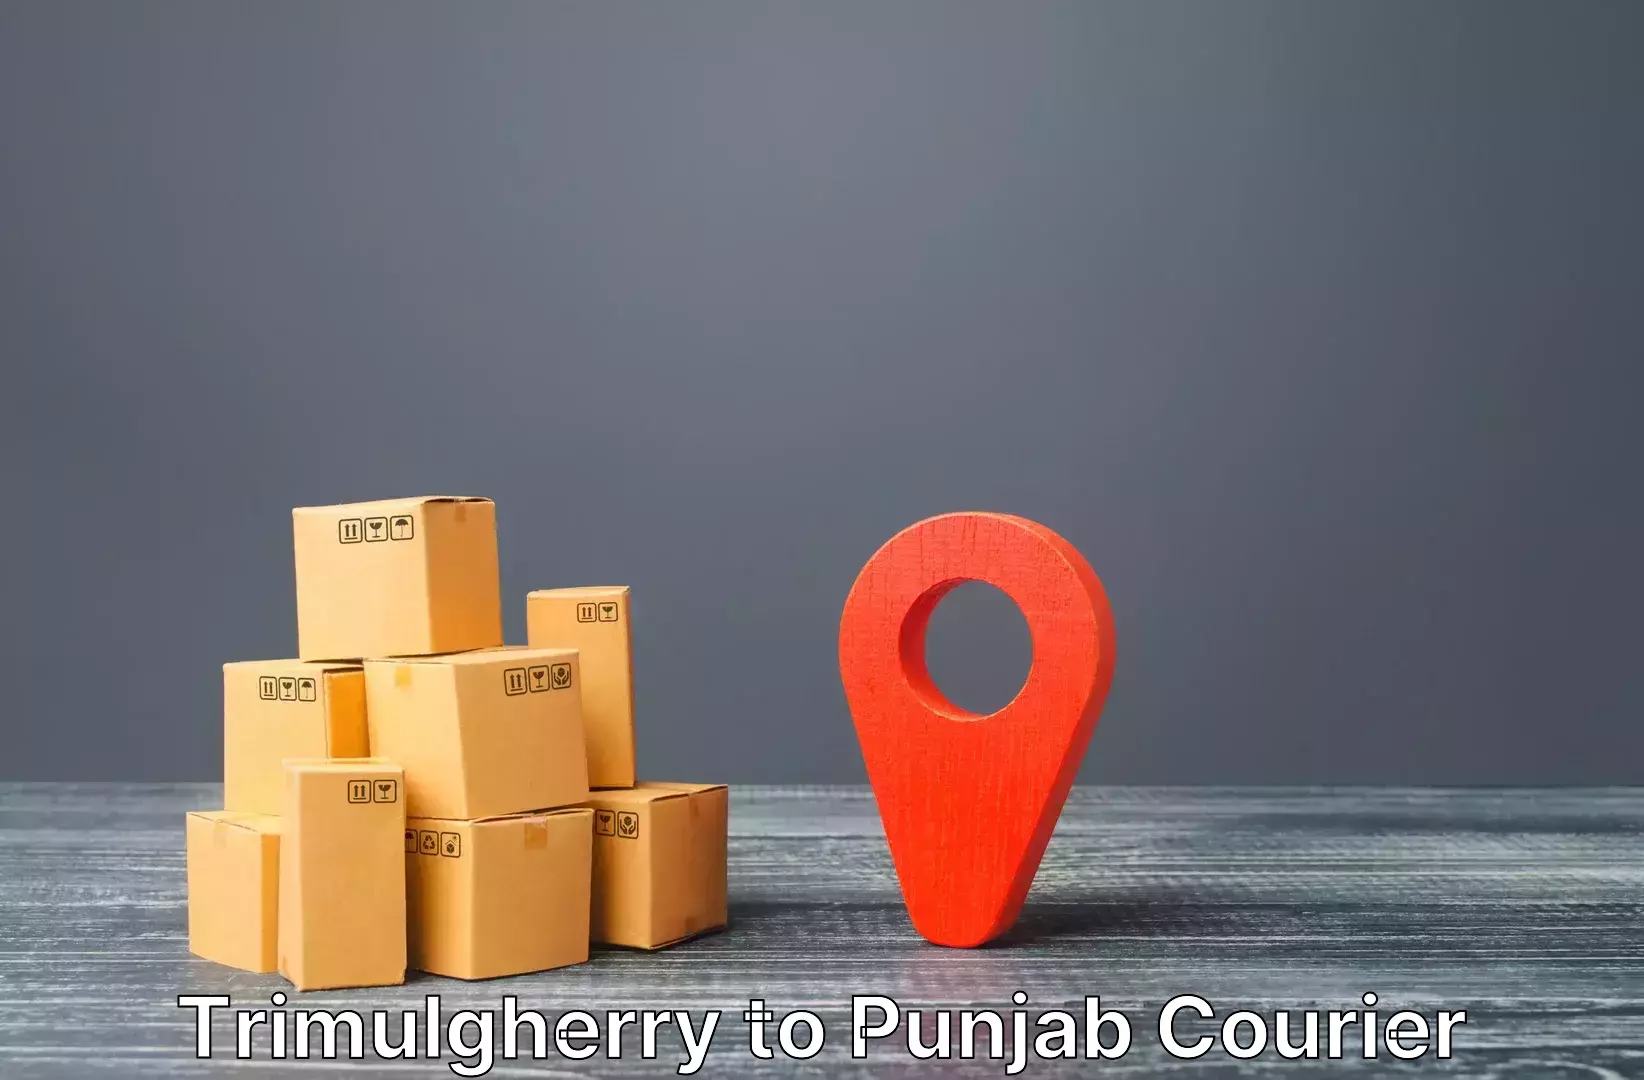 Doorstep luggage collection in Trimulgherry to Punjab